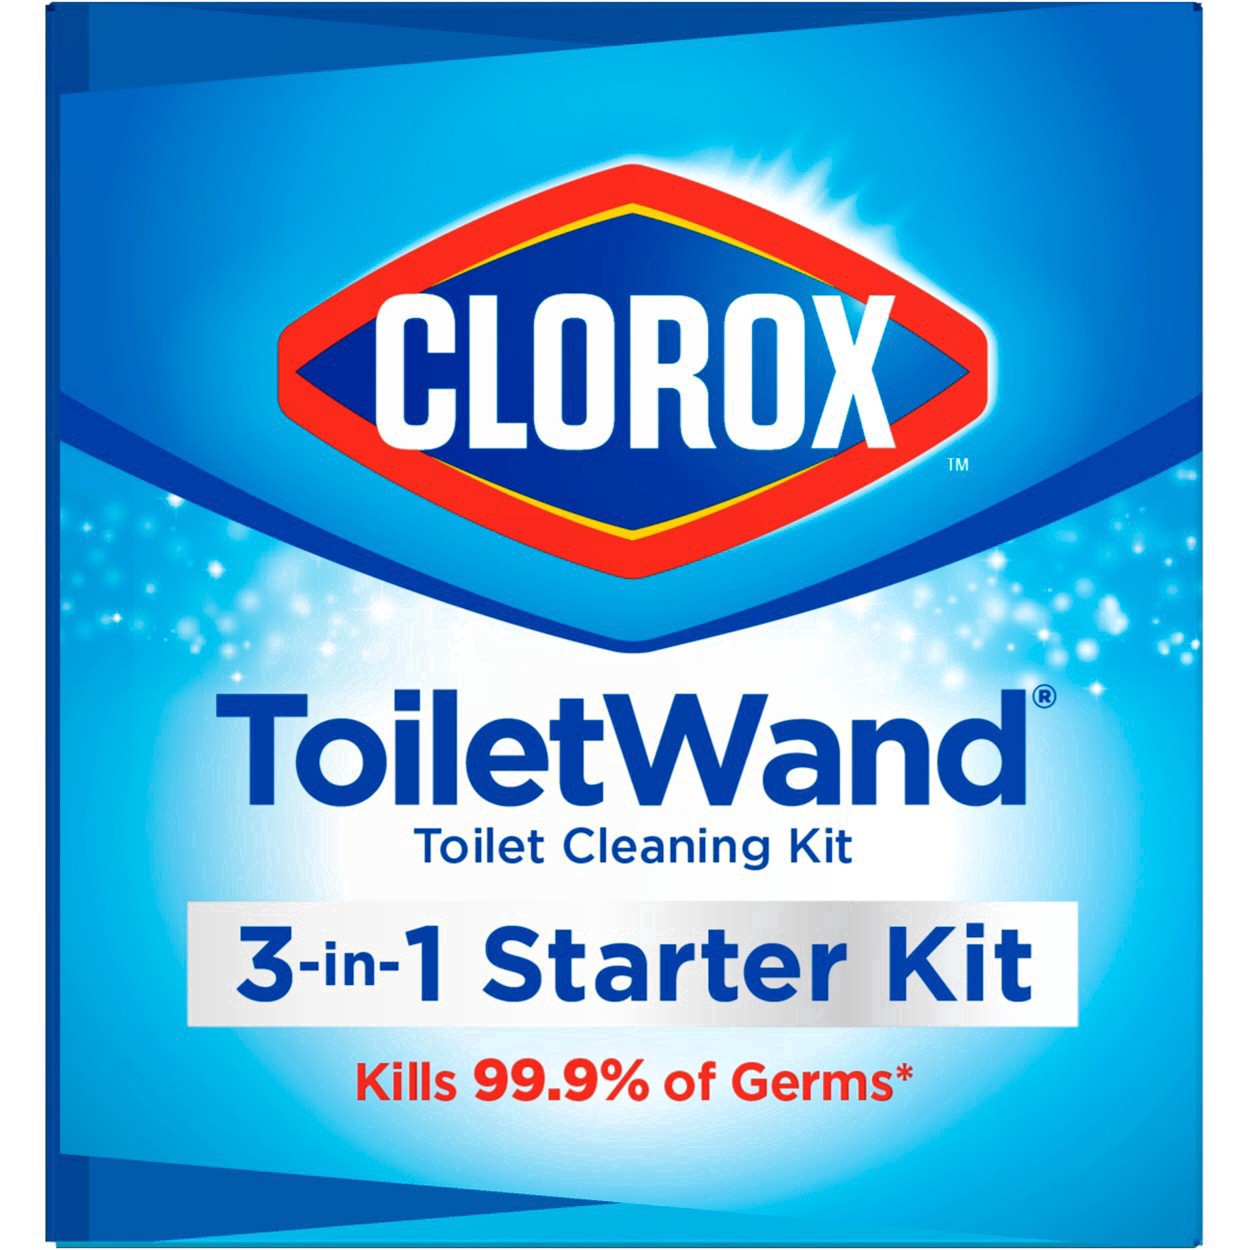 slide 48 of 176, Clorox Toilet Wand 3-in-1 Starter Toliet Cleaning Kit, 1 ct